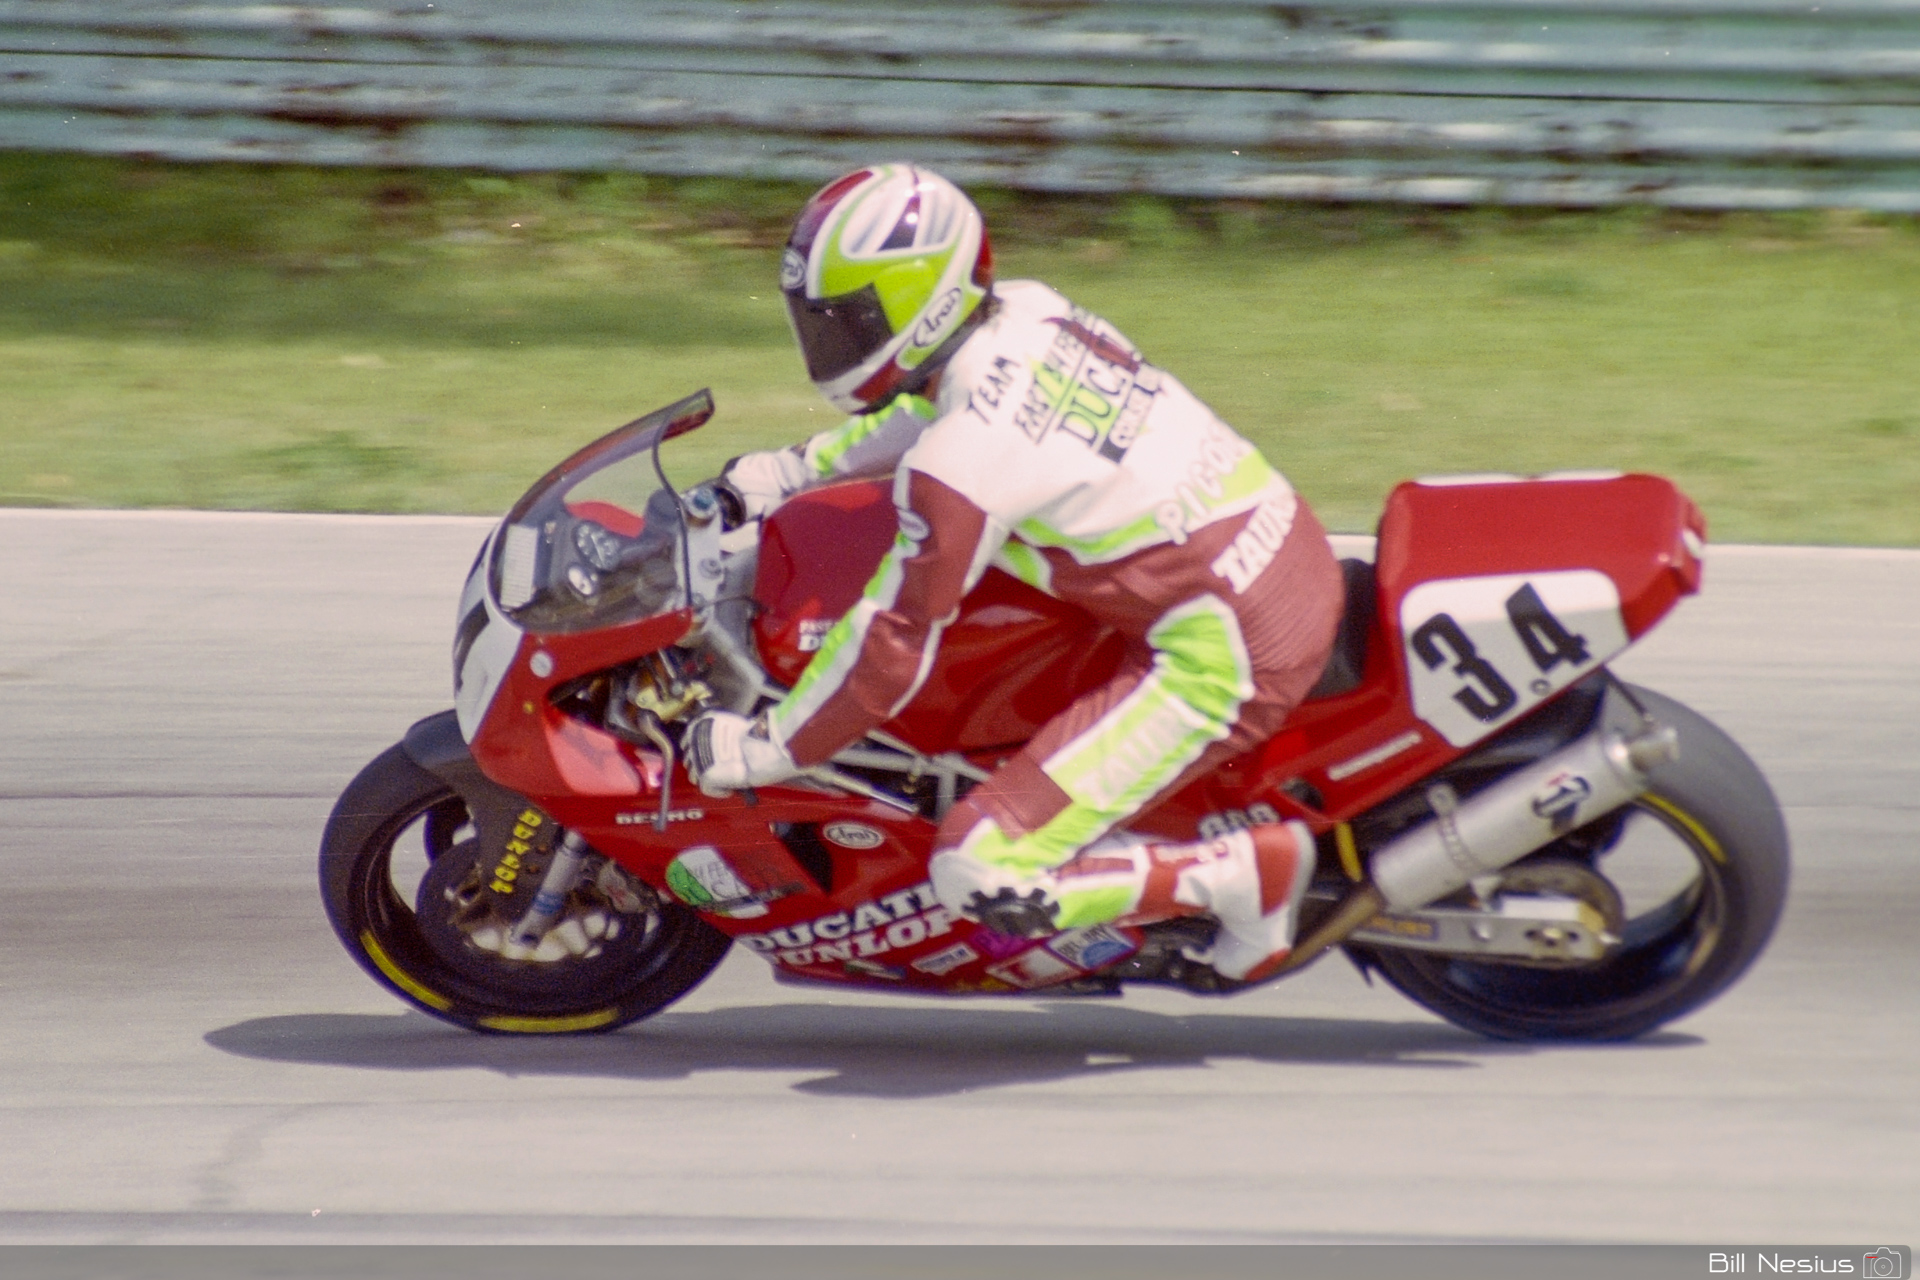 Pascal Picotte on the Number 34 Fast by Ferracci Ducati 851 / FLM_7482 / 